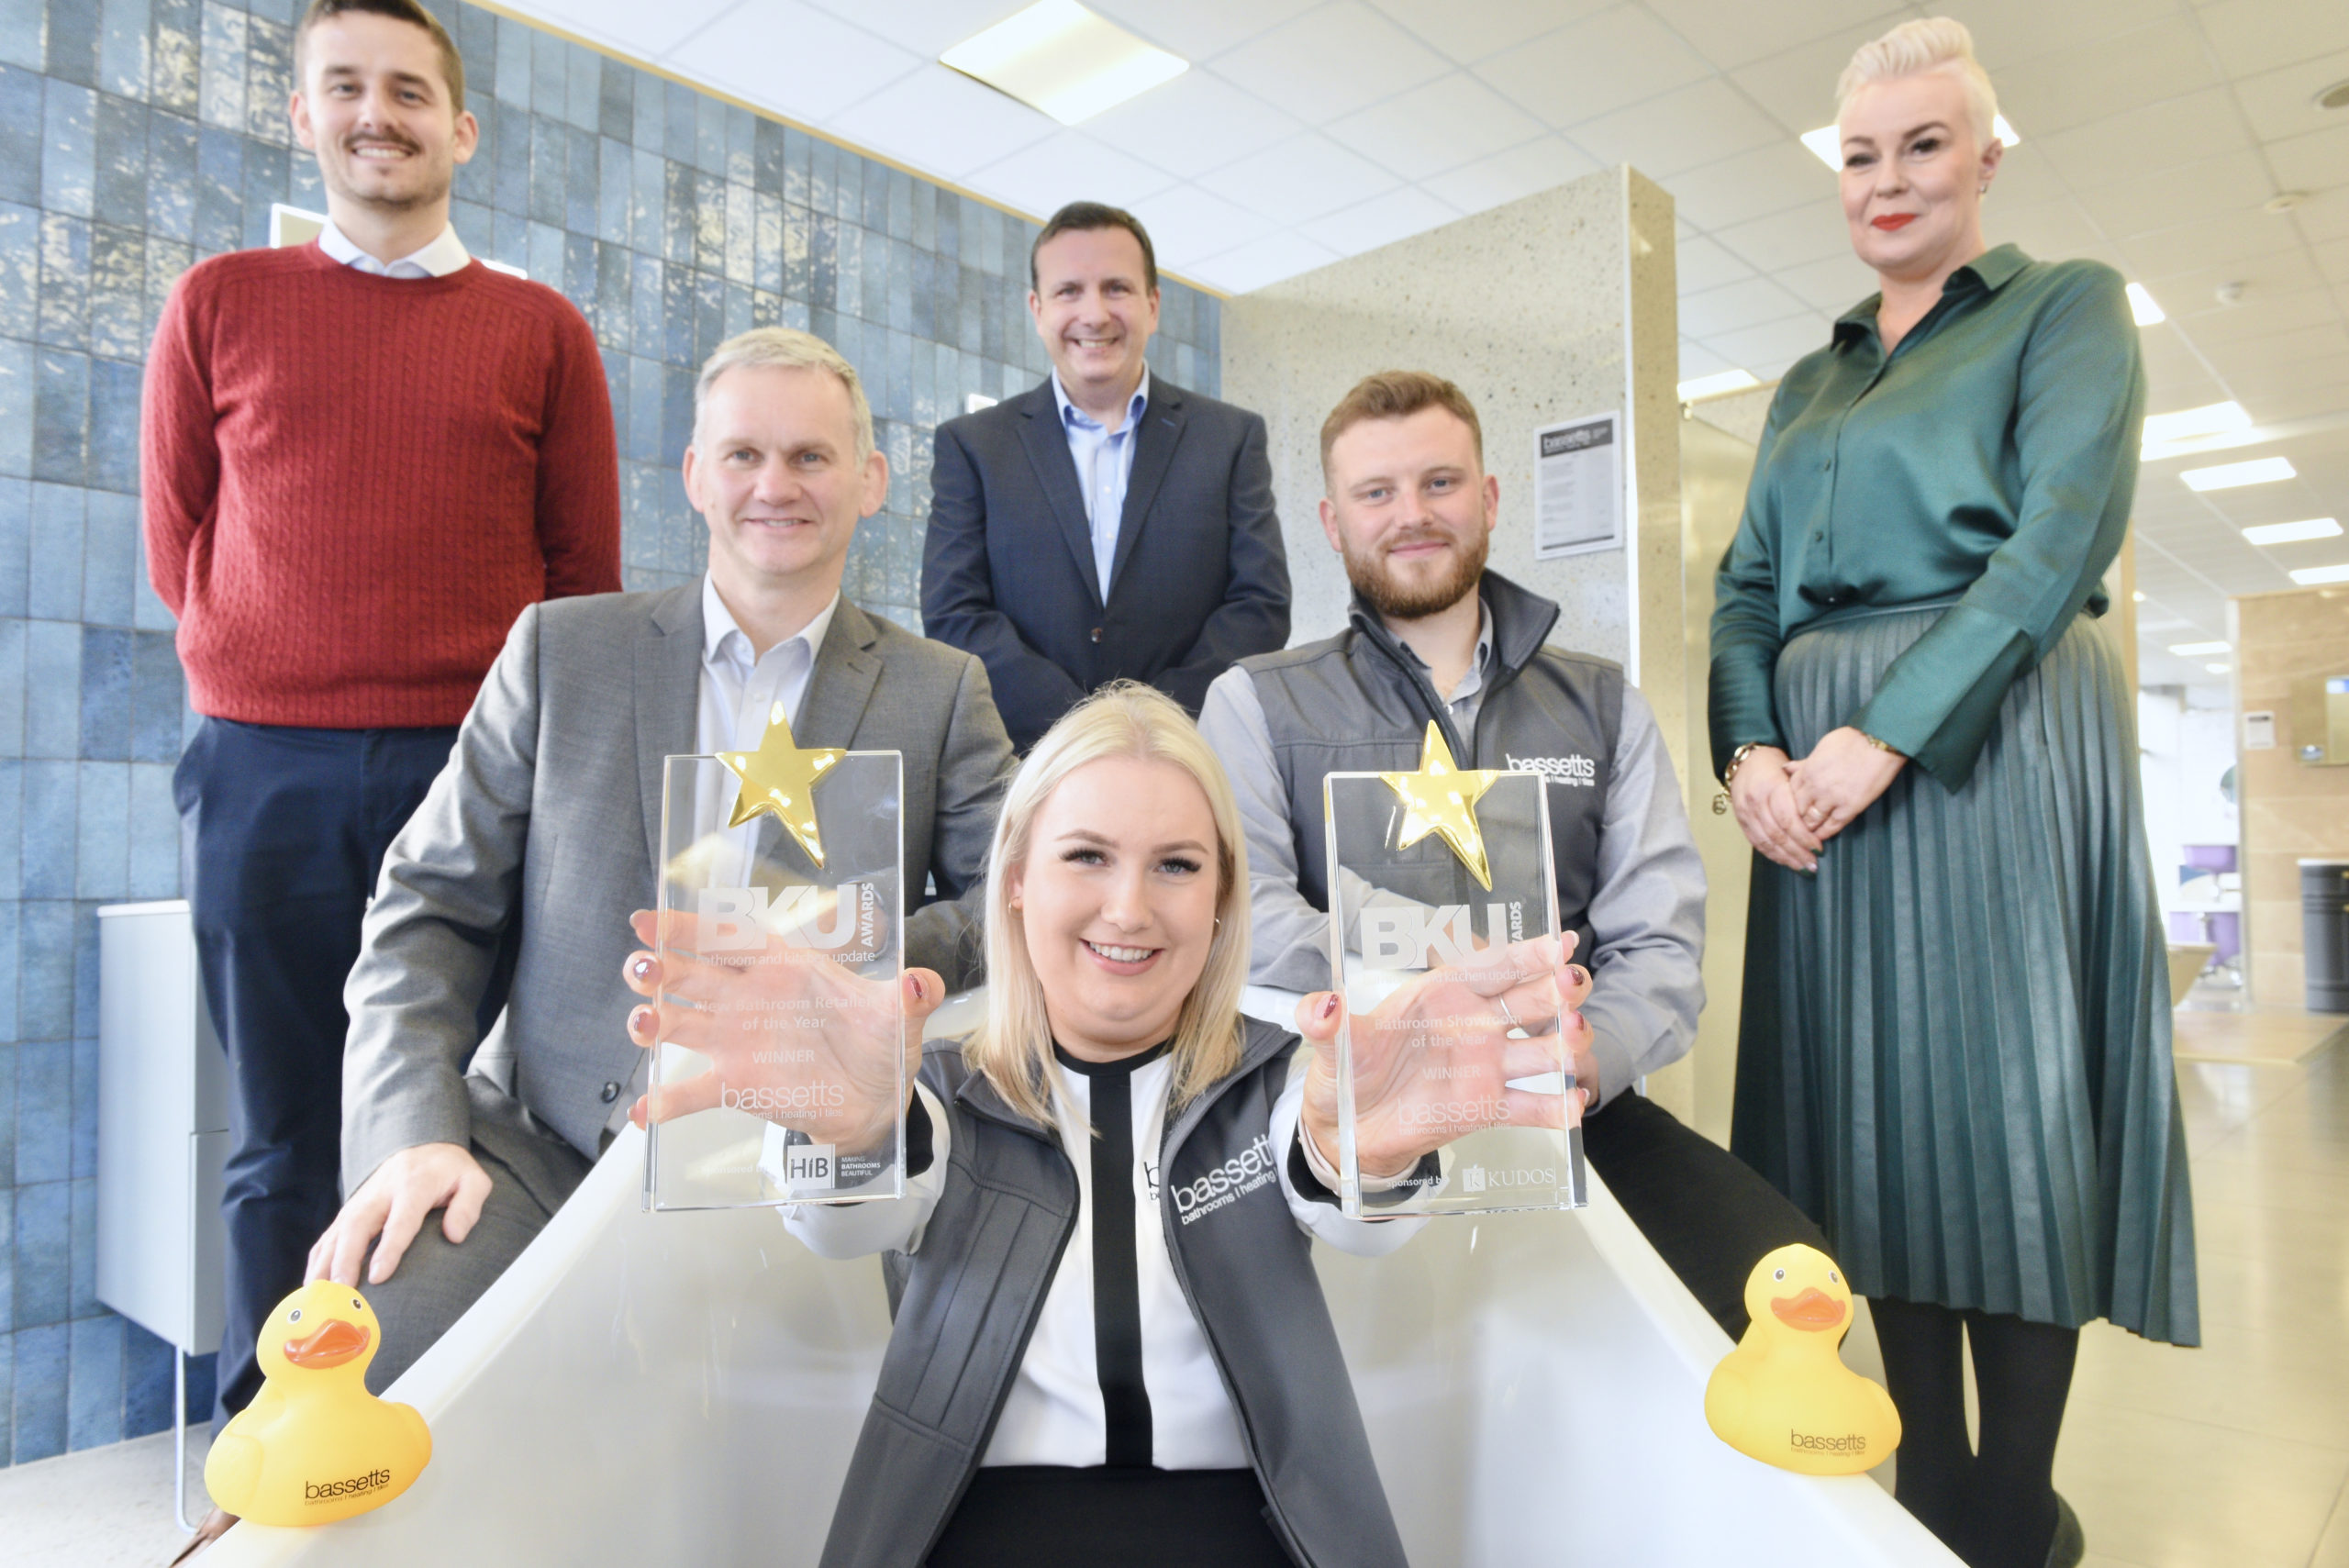 Bassetts celebrate two wins at the BKU awards.